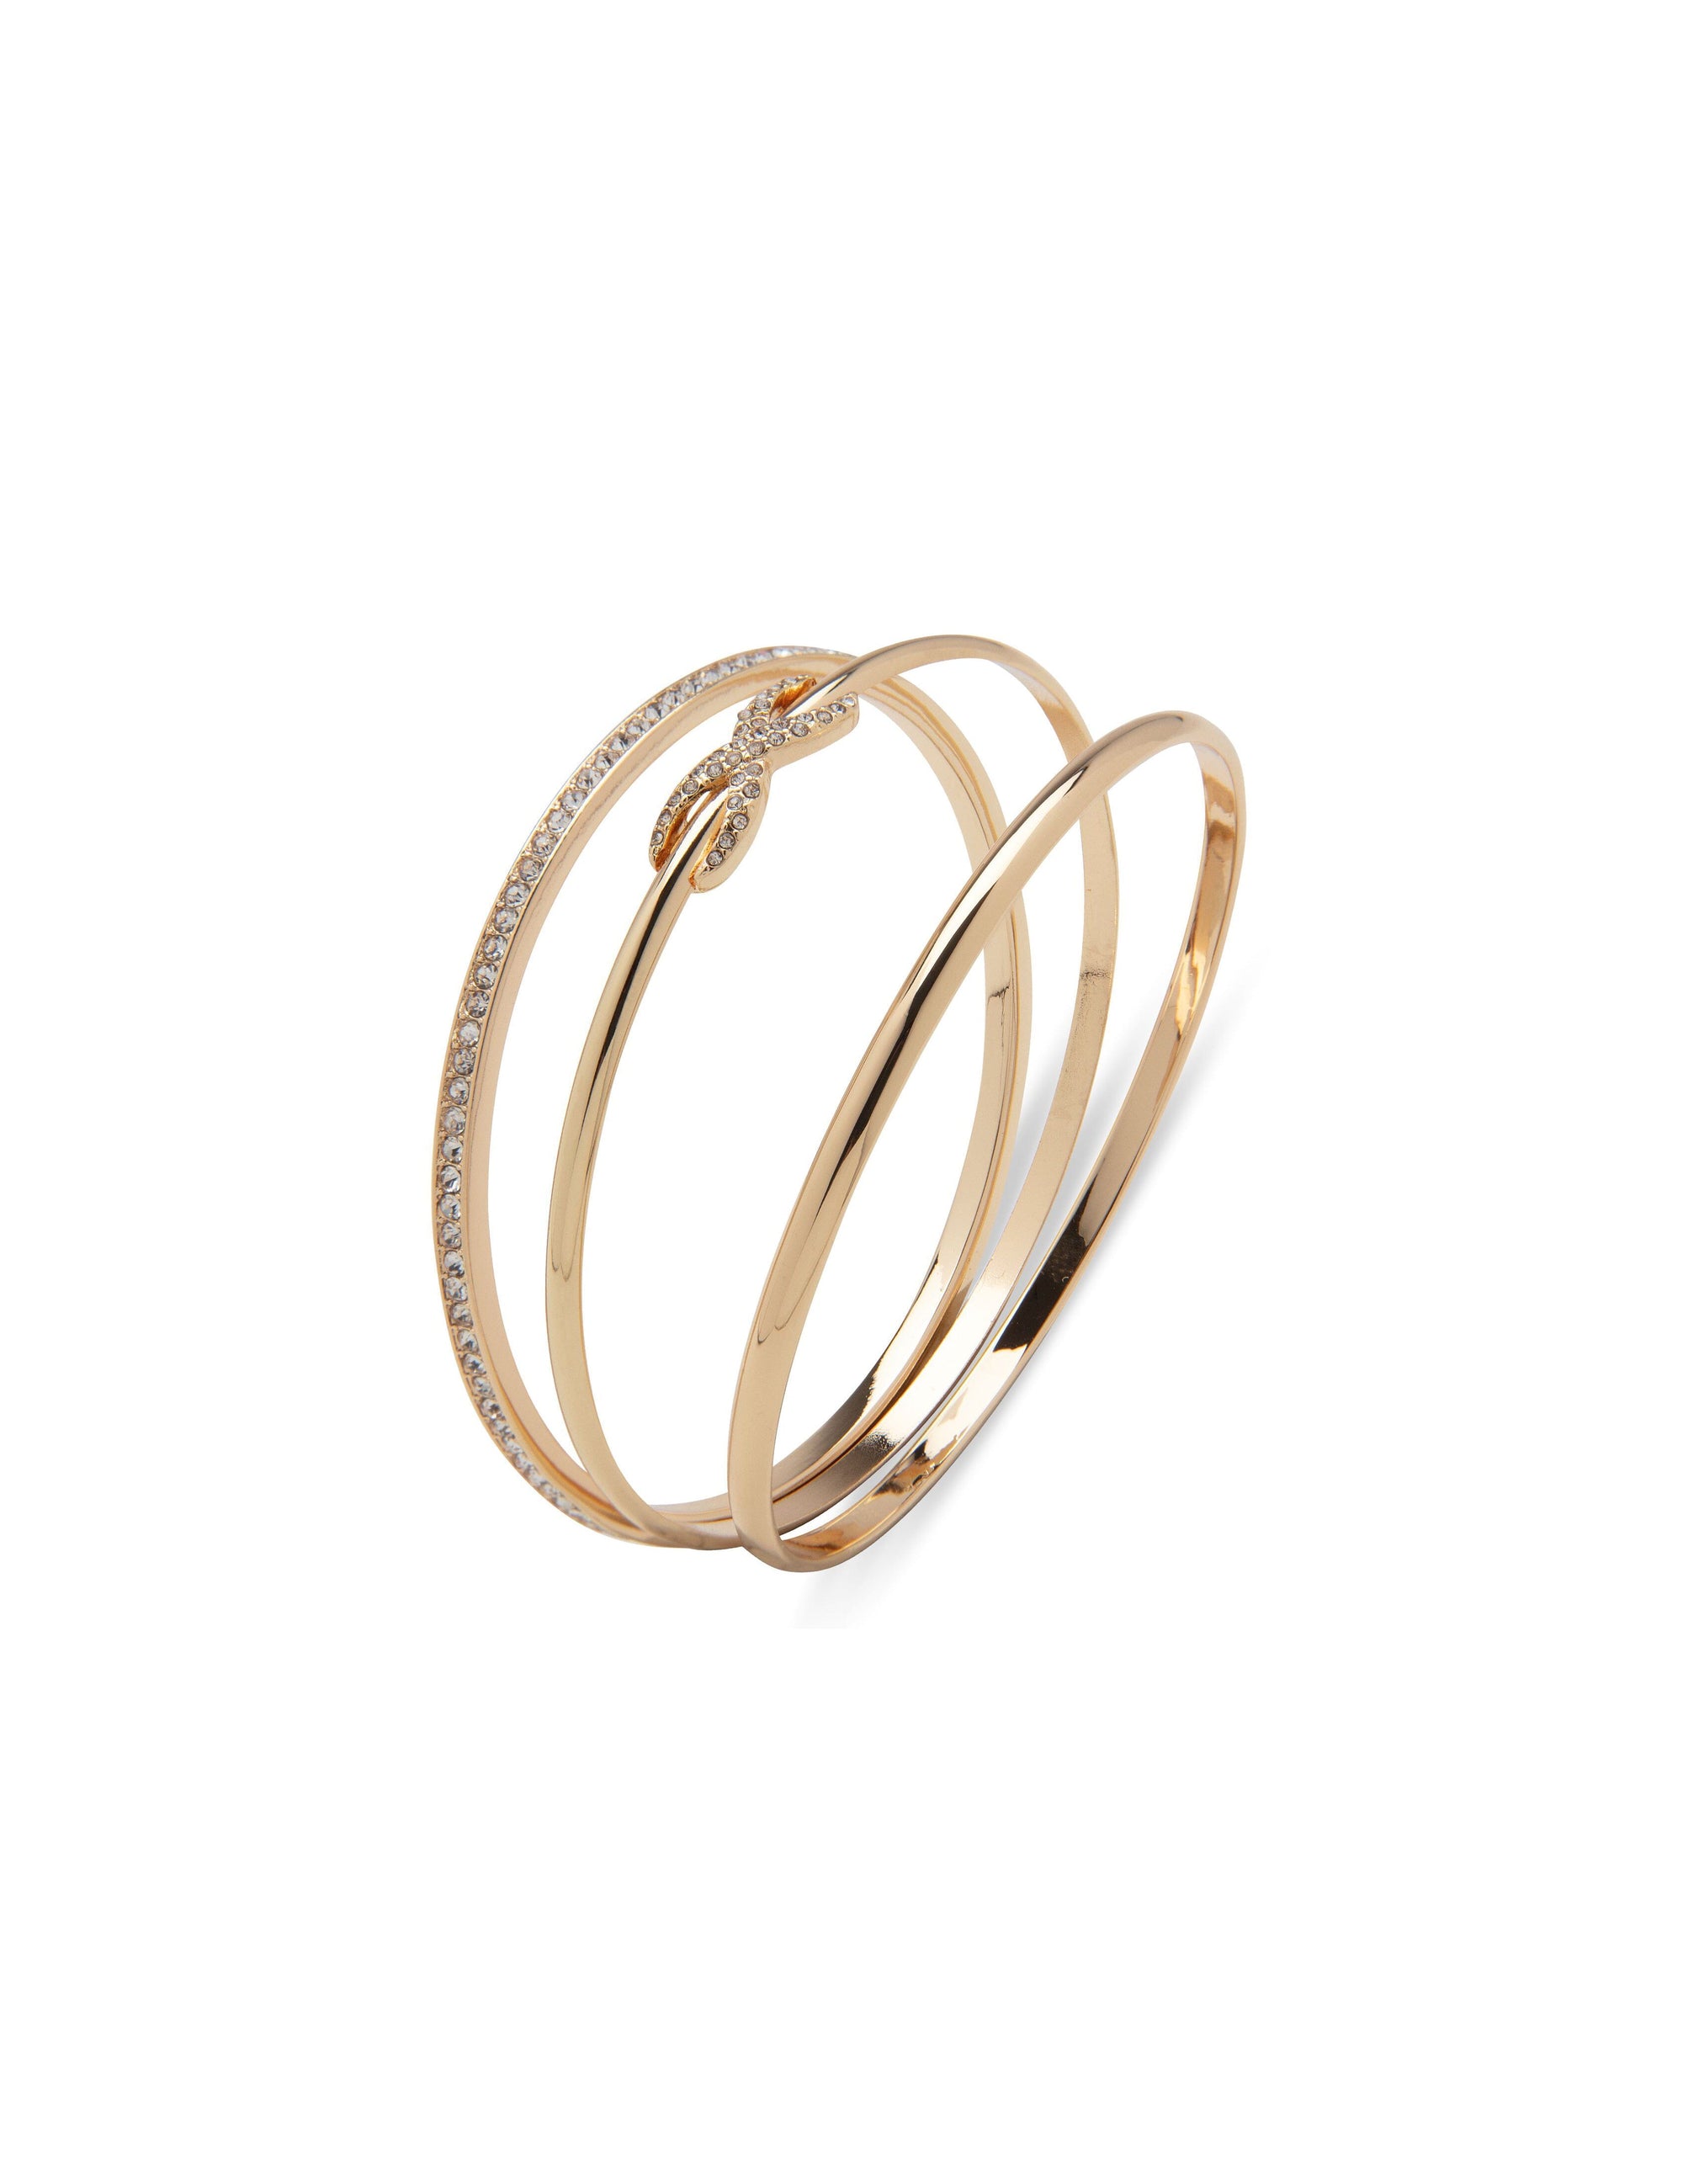 Anne Klein Gold Tone Infinity Knot Bangle Set in Gift Box